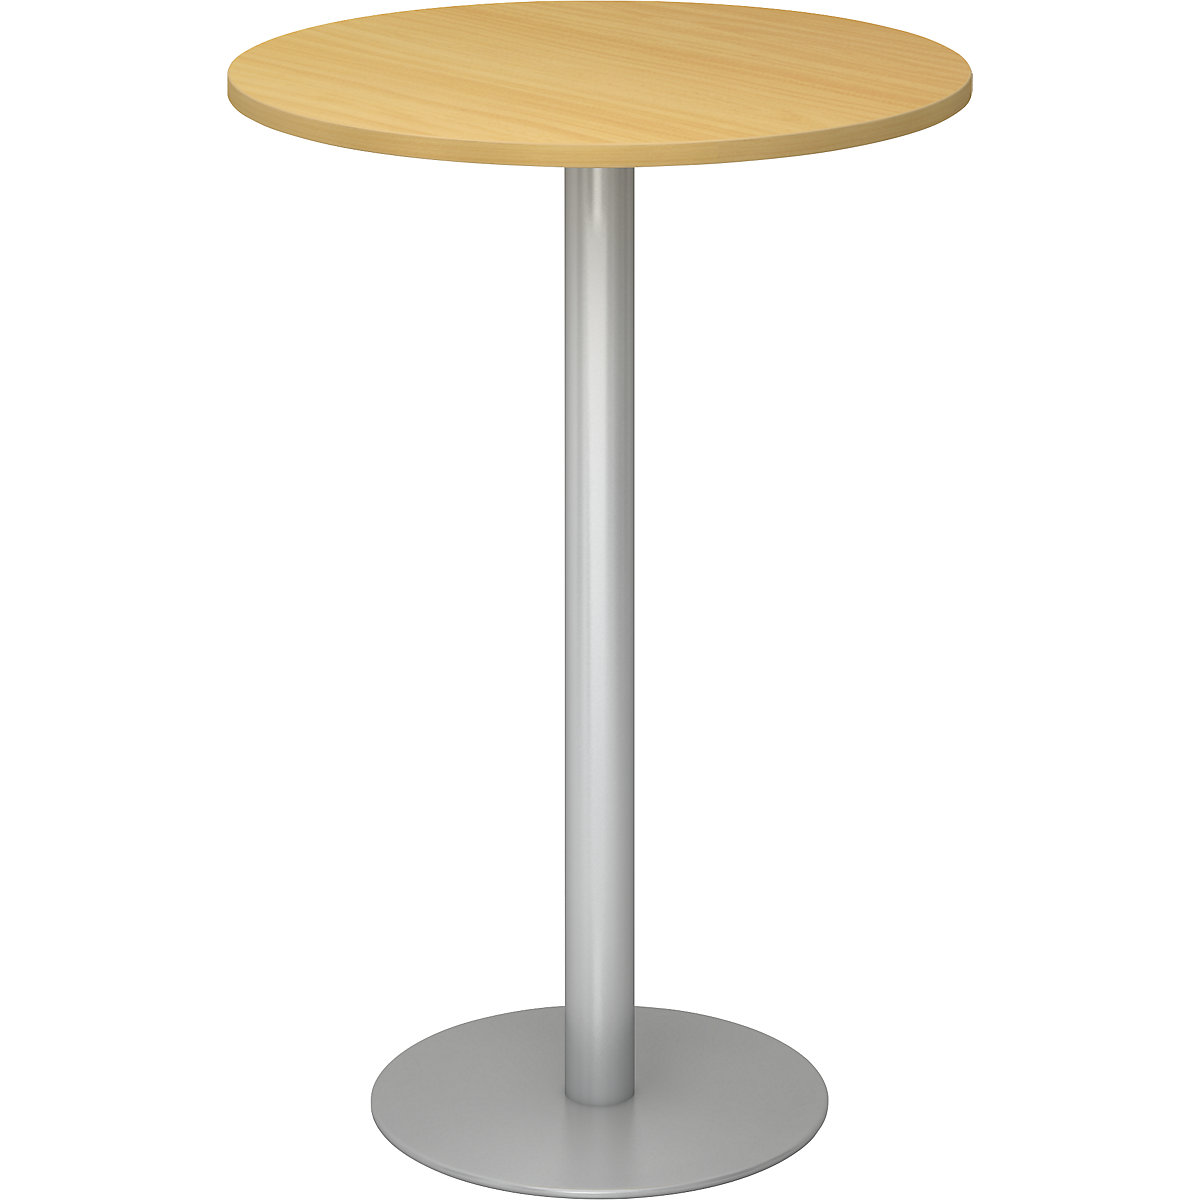 Pedestal table, Ø 800 mm, 1116 mm high, silver frame, tabletop in beech finish-5